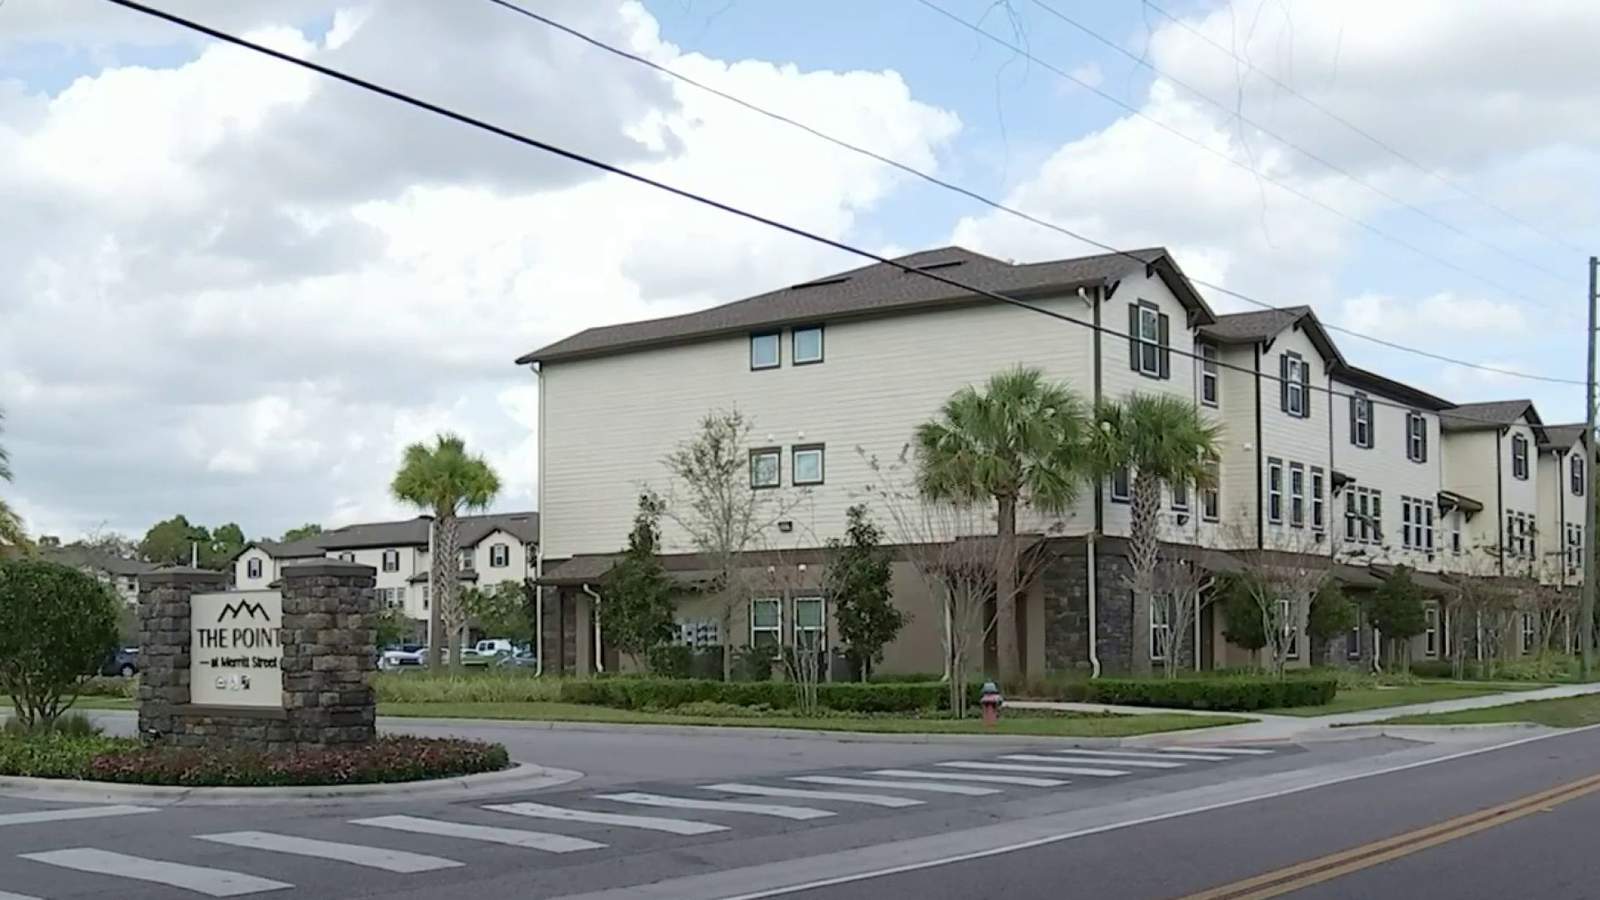 For the first time in 13 years, Florida agrees to fully fund affordable housing